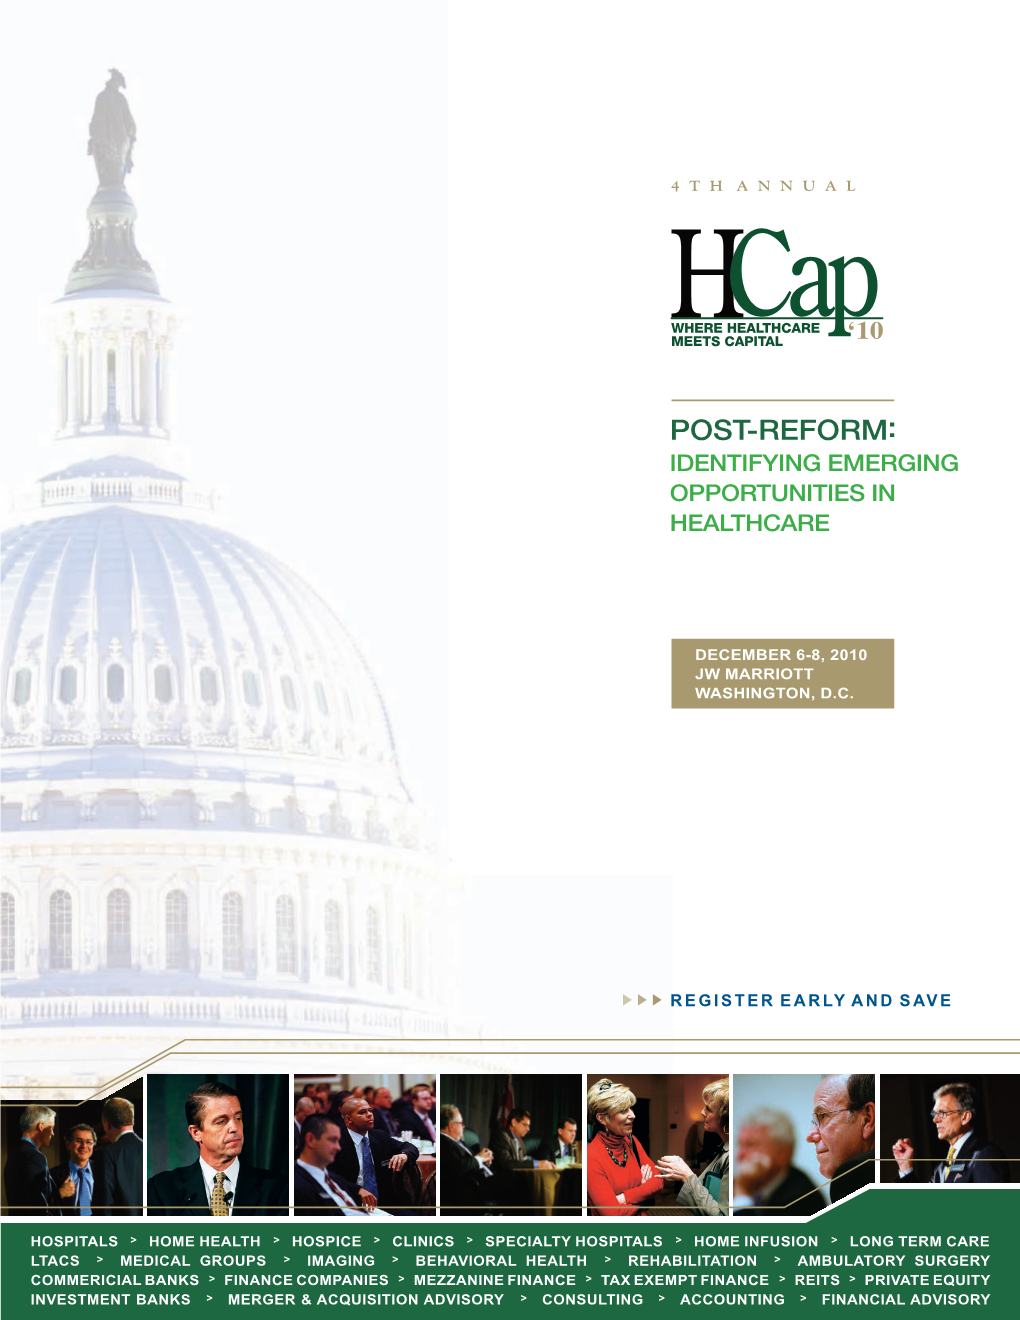 Post-Reform: Identifying Emerging Opportunities in Healthcare